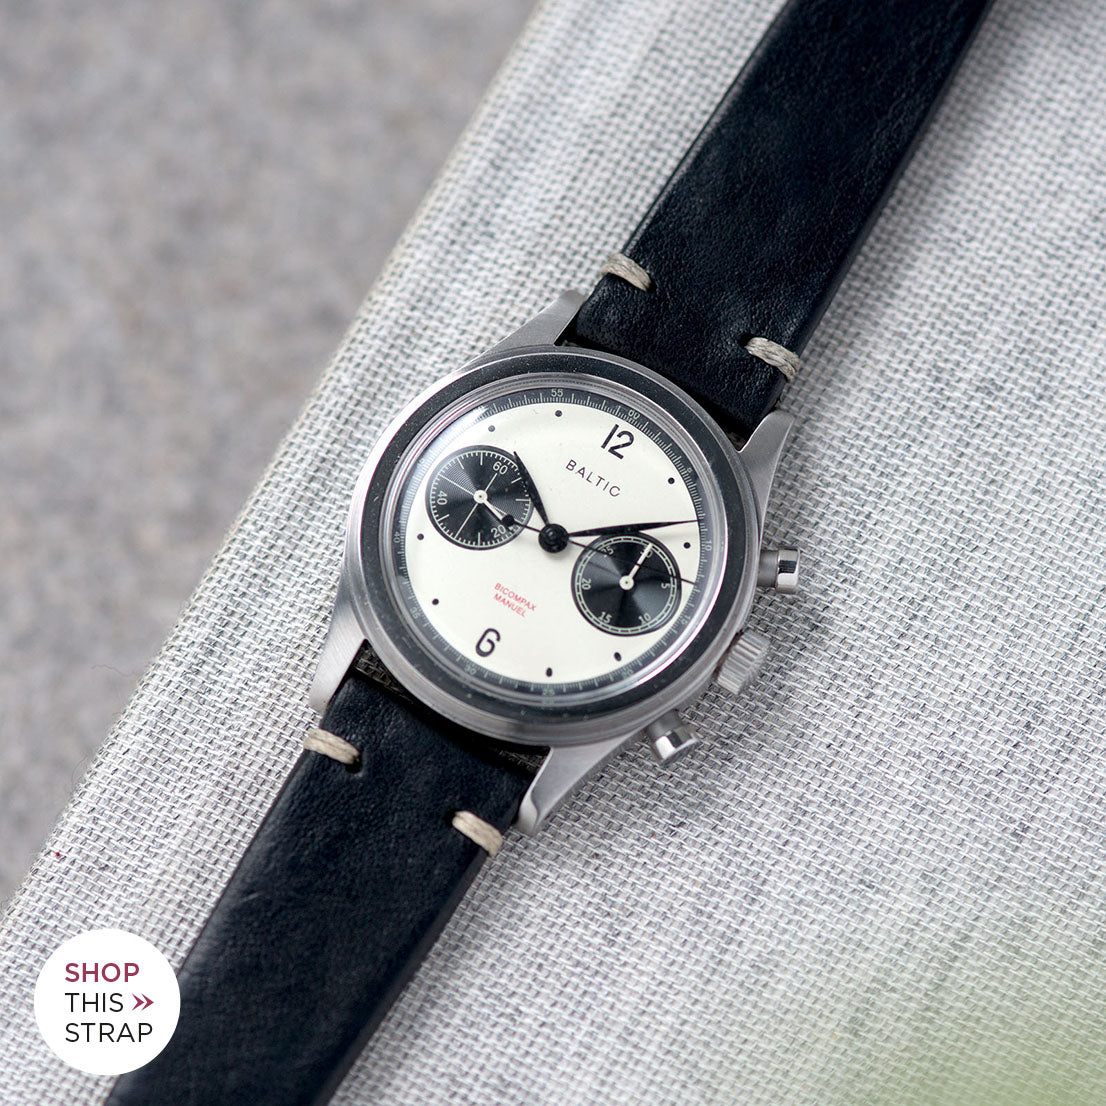 Bulang and Sons_Strap Guide_The Baltic-Chronograph-Panda-Limited-Edition_Black Leather Watch Strap